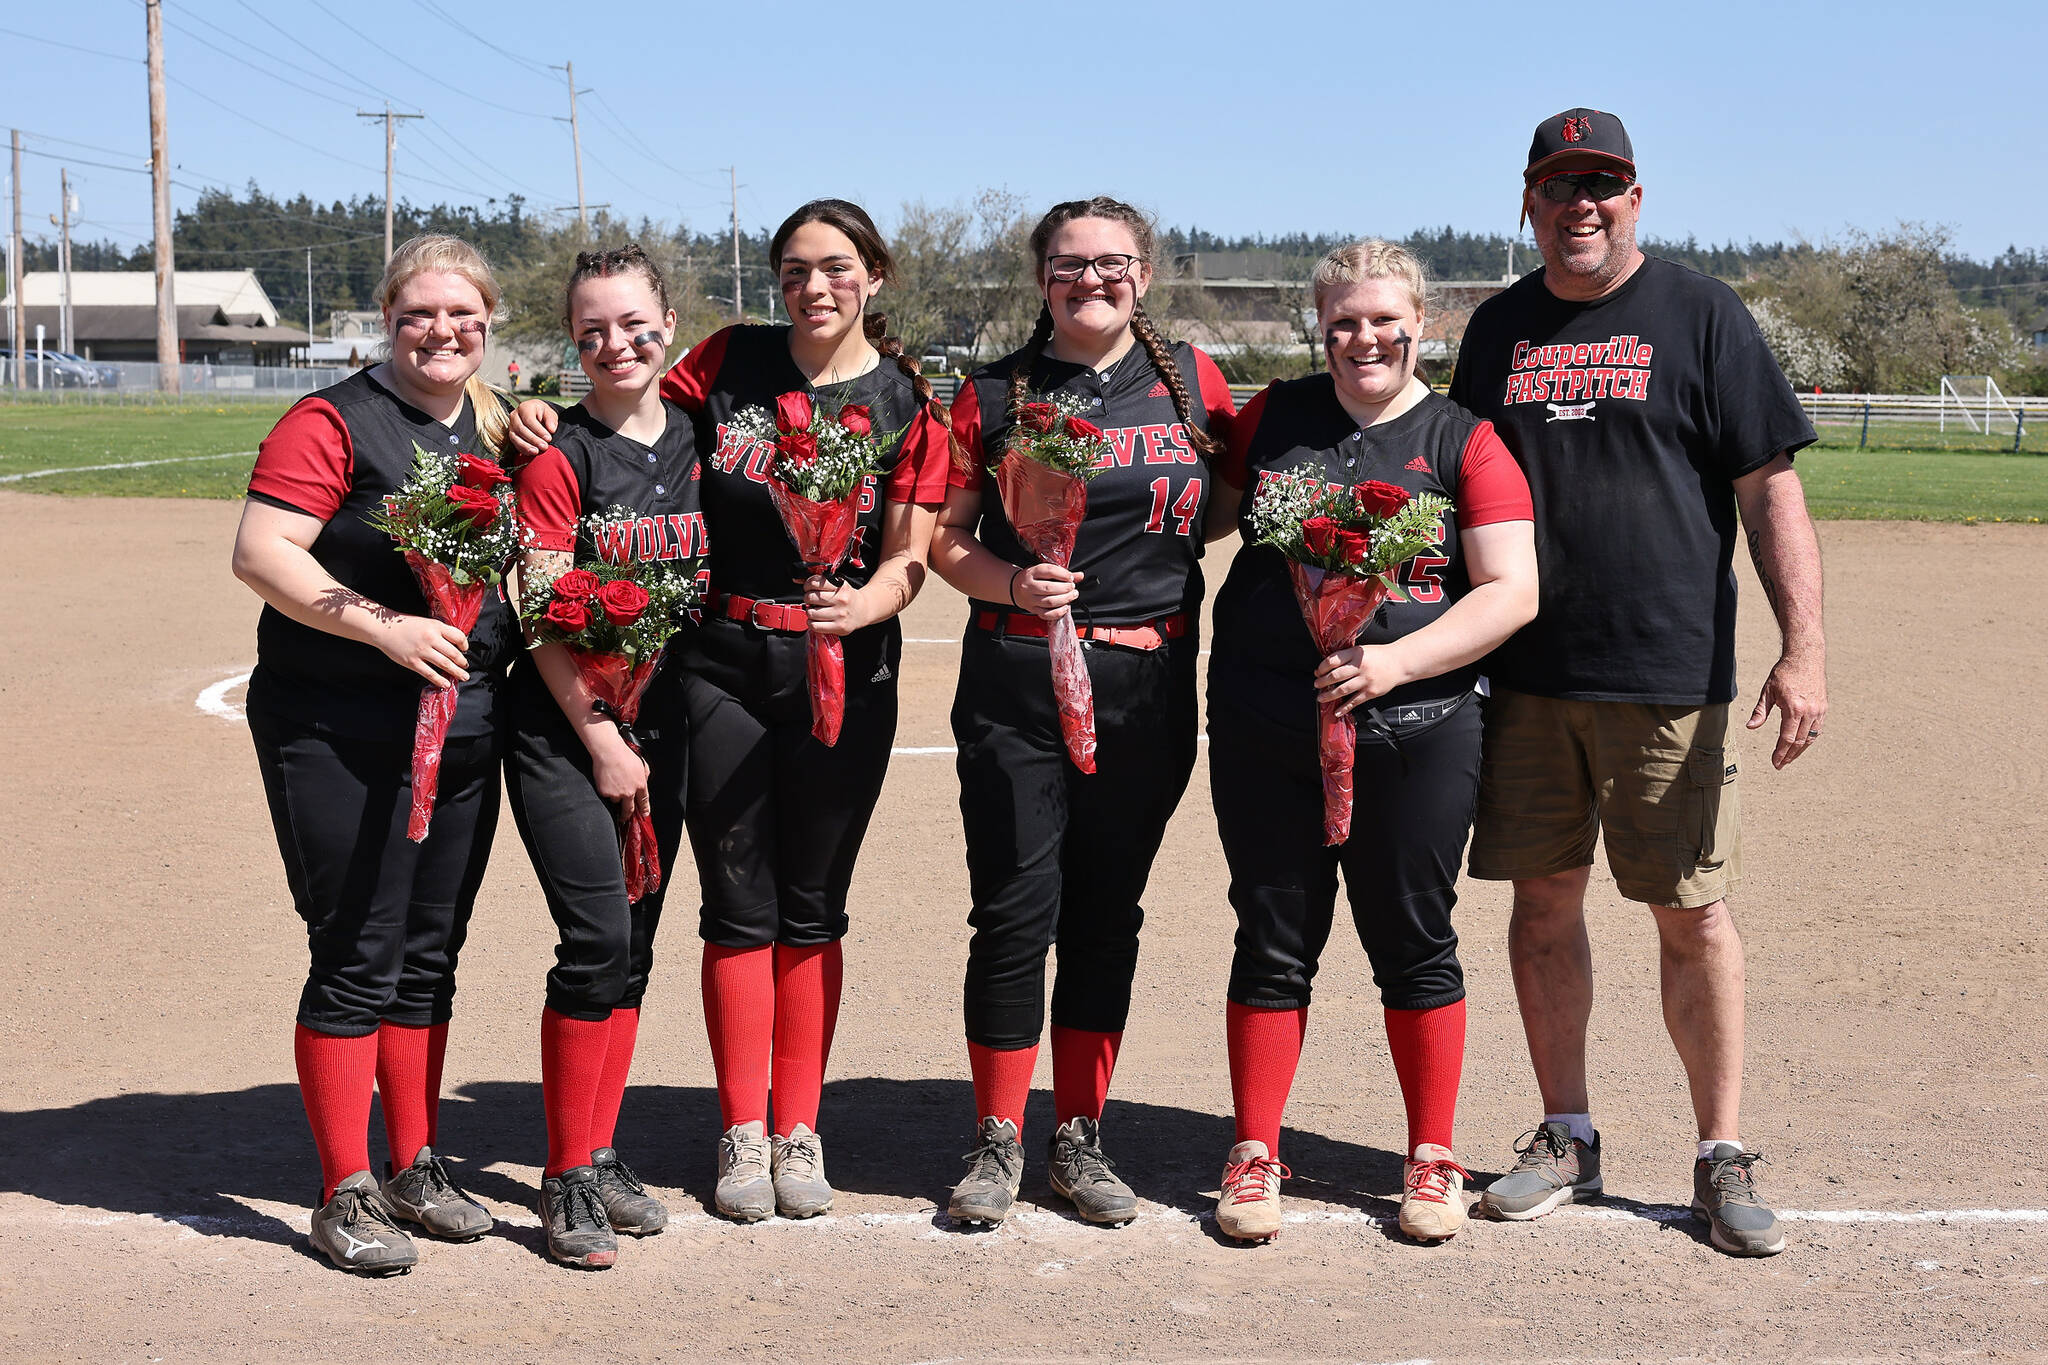 Photo by John Fisken
From left, seniors Maya Lucero, Gwen Gustafson, Melanie Navarro, Sofia Peters and Allie Lucero and Coach Kevin McGranahan celebrate senior night at a softball game against La Conner Saturday afternoon. The Wolves won 17-2.